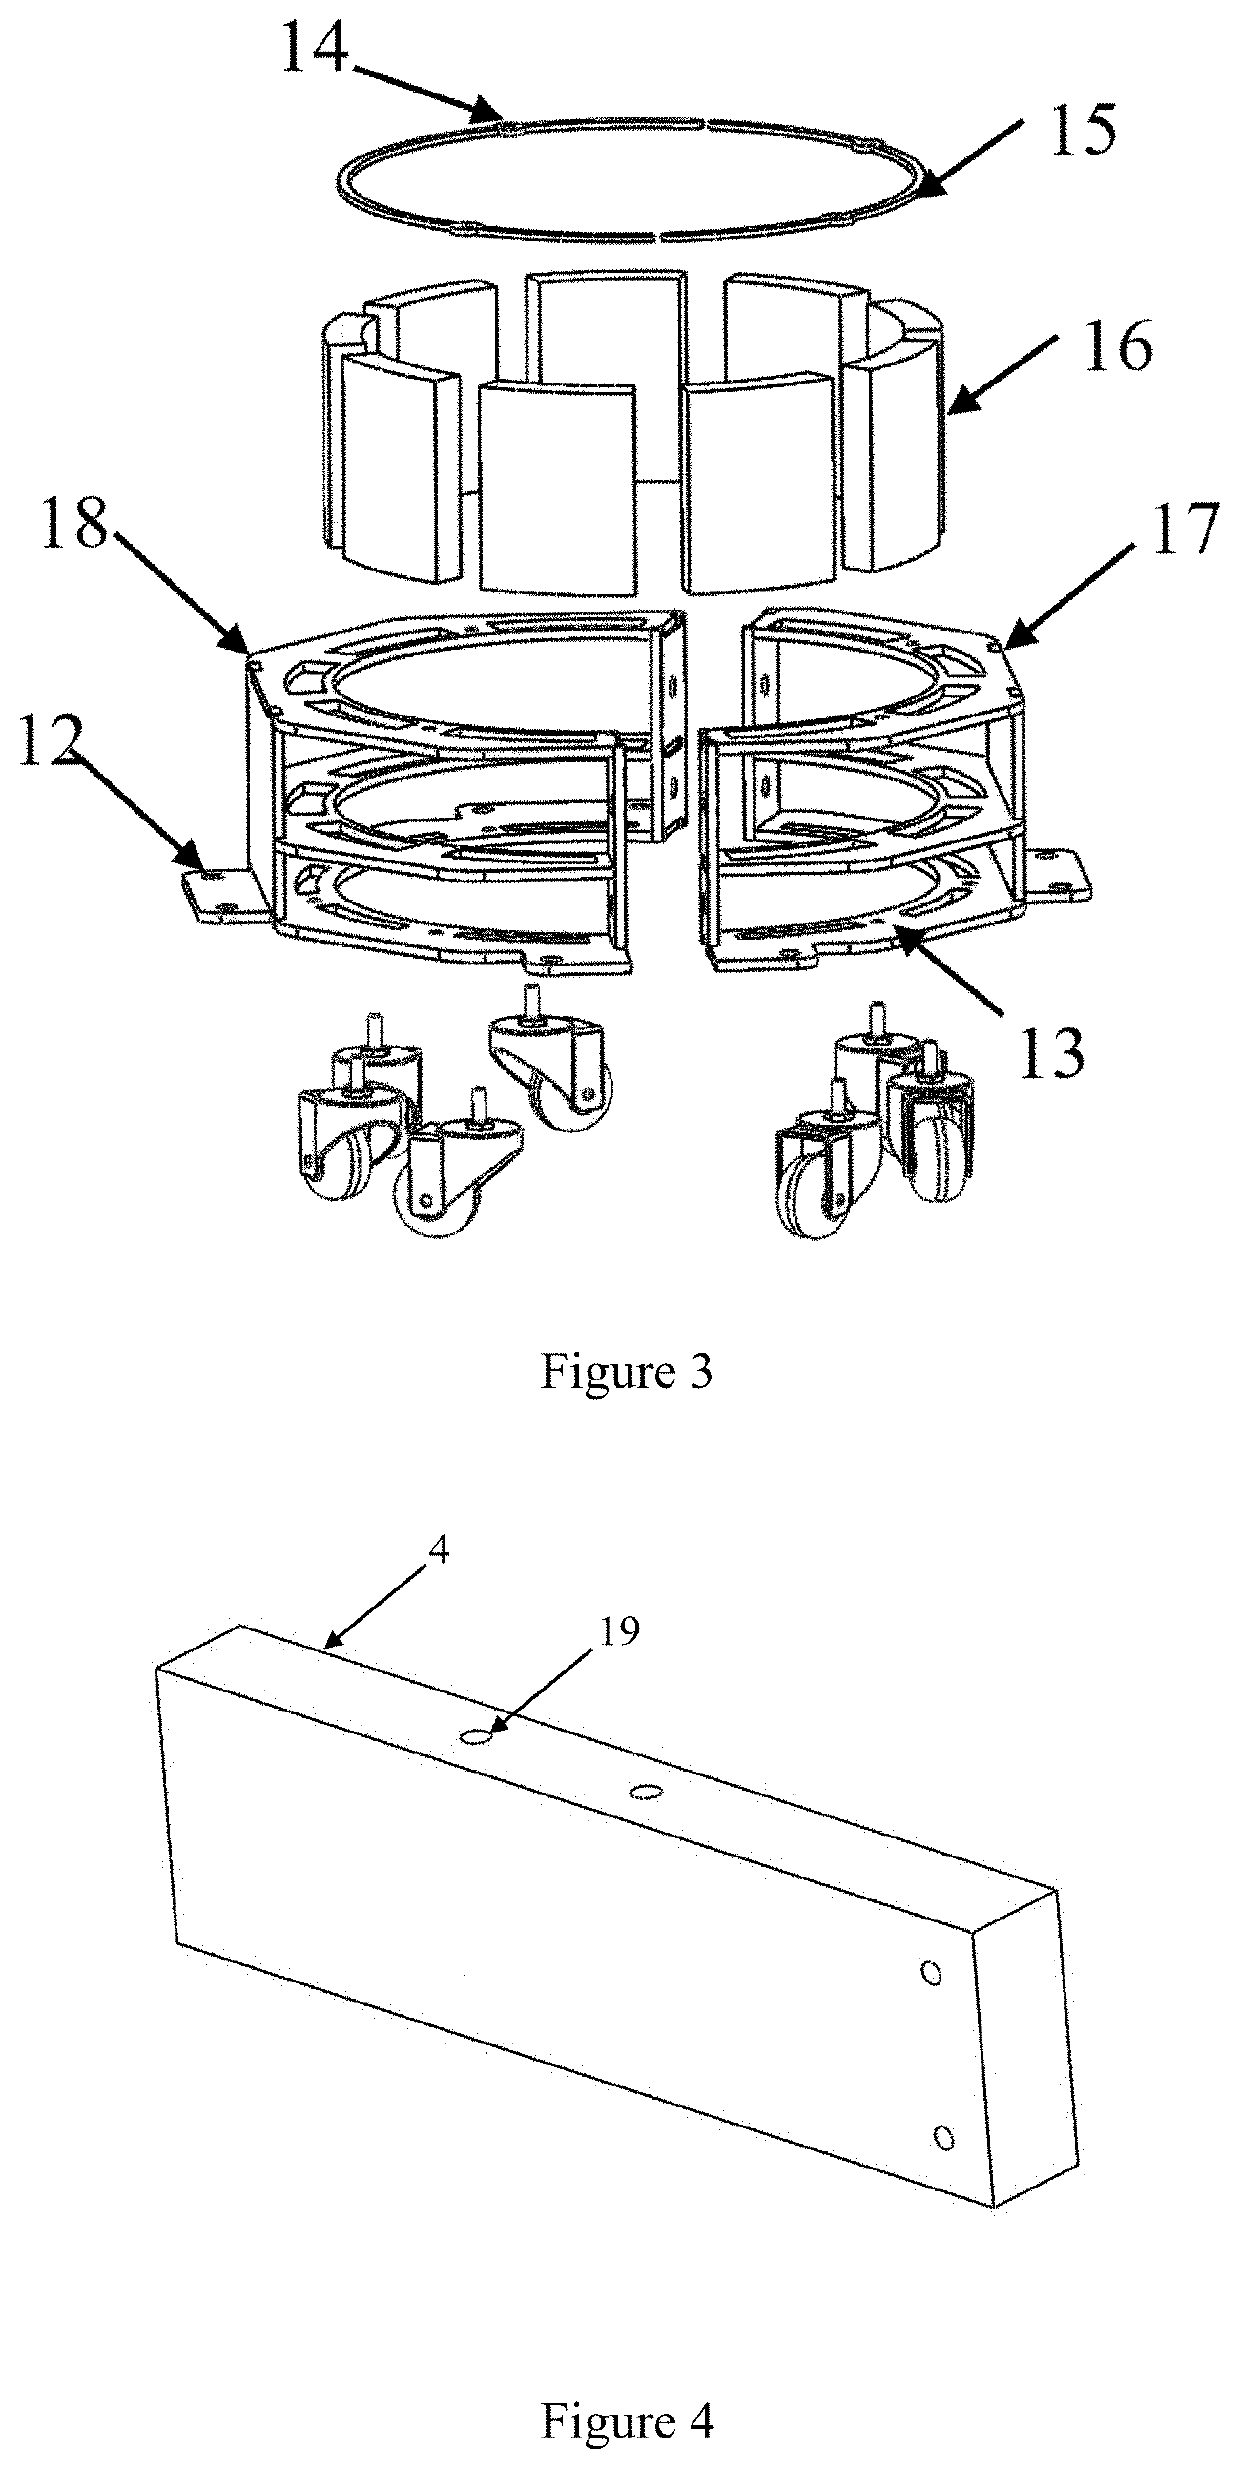 Double-ring shaped strong magnet array nonlinear dynamic vibration absorber for vibration mitigation of suspender cables and design method thereof